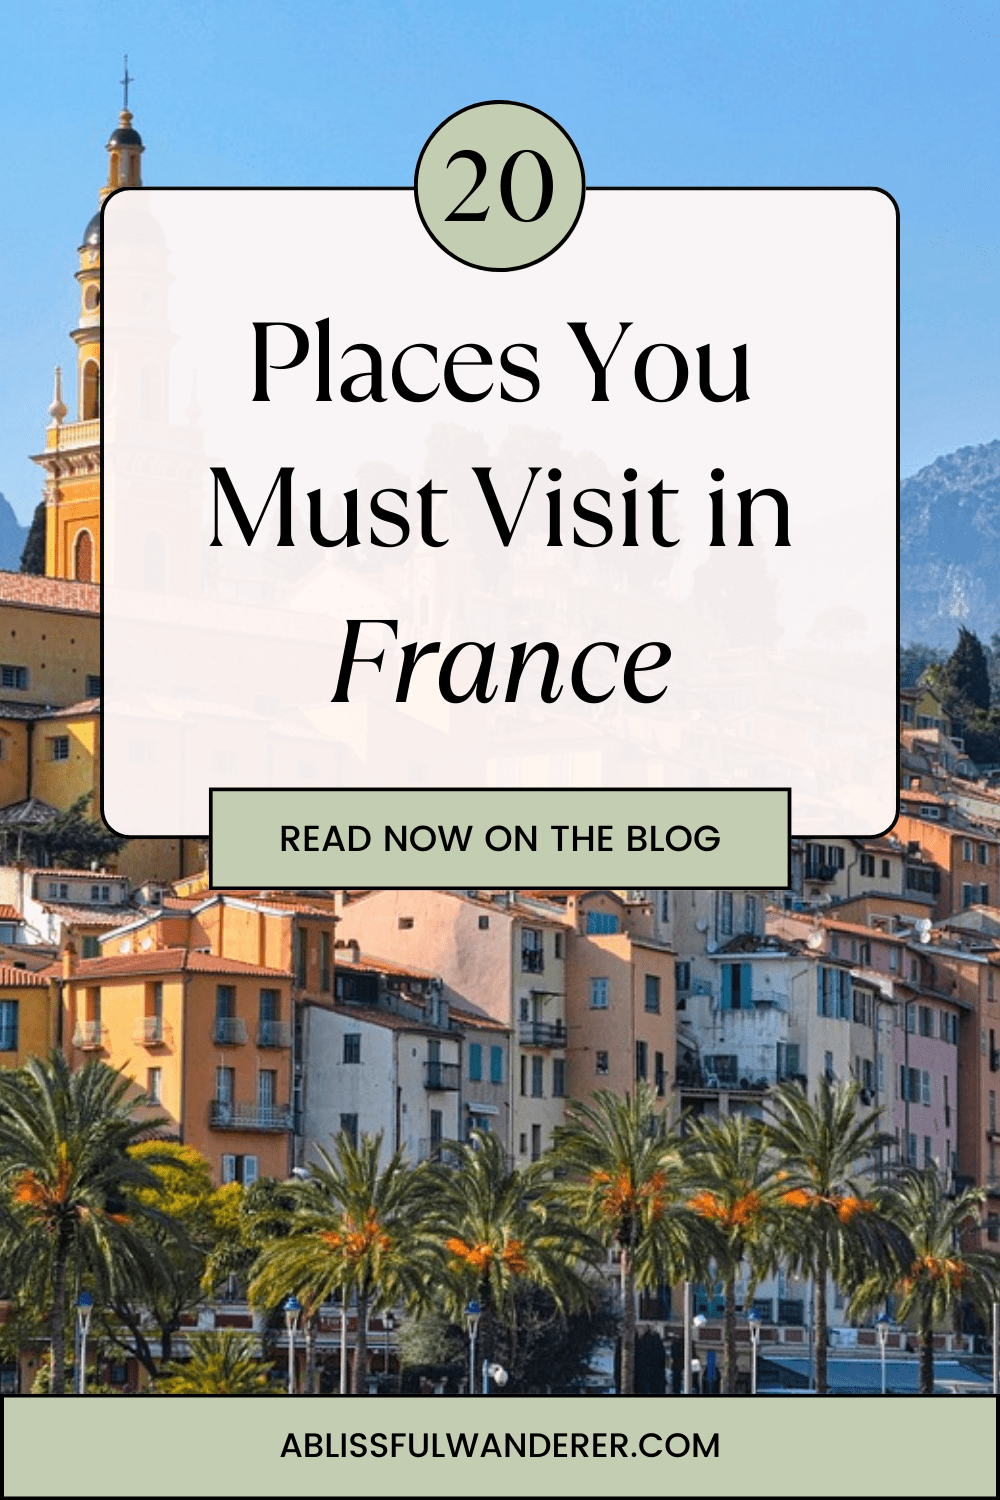 A rich pin image with the words "20 places you must-visit in France